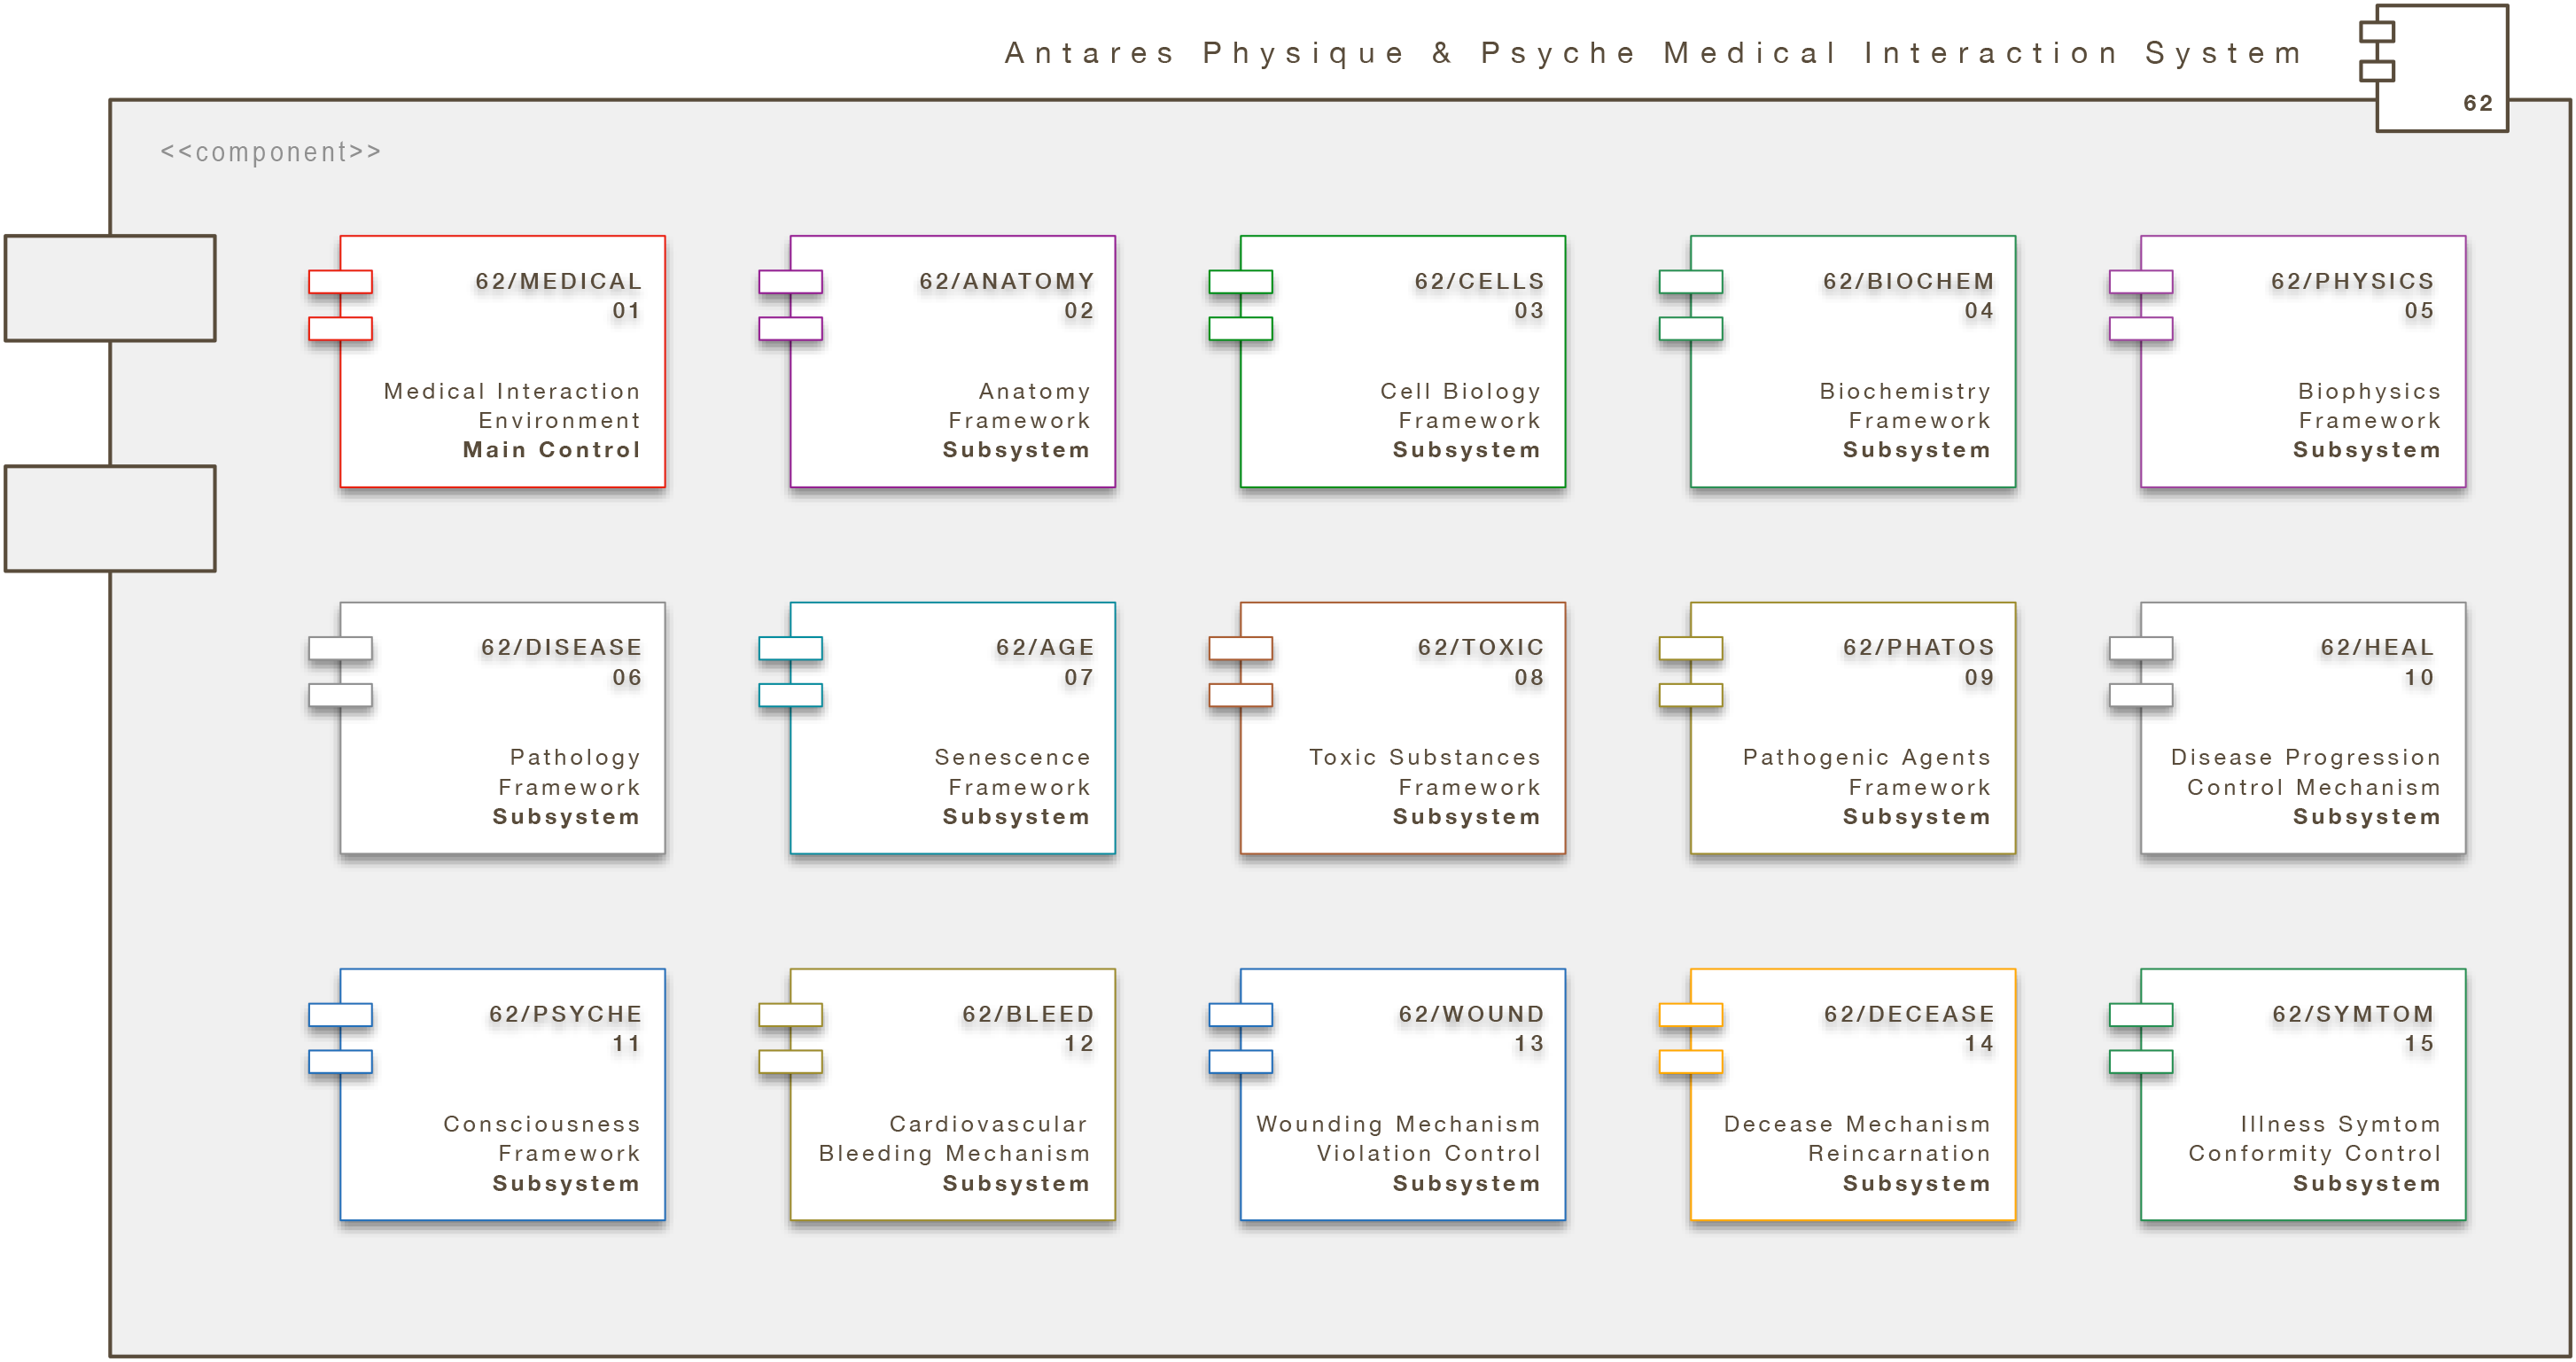 Core Engine Modul: Antares Physique & Psyche Medical Interaction System (A/PPMIS)